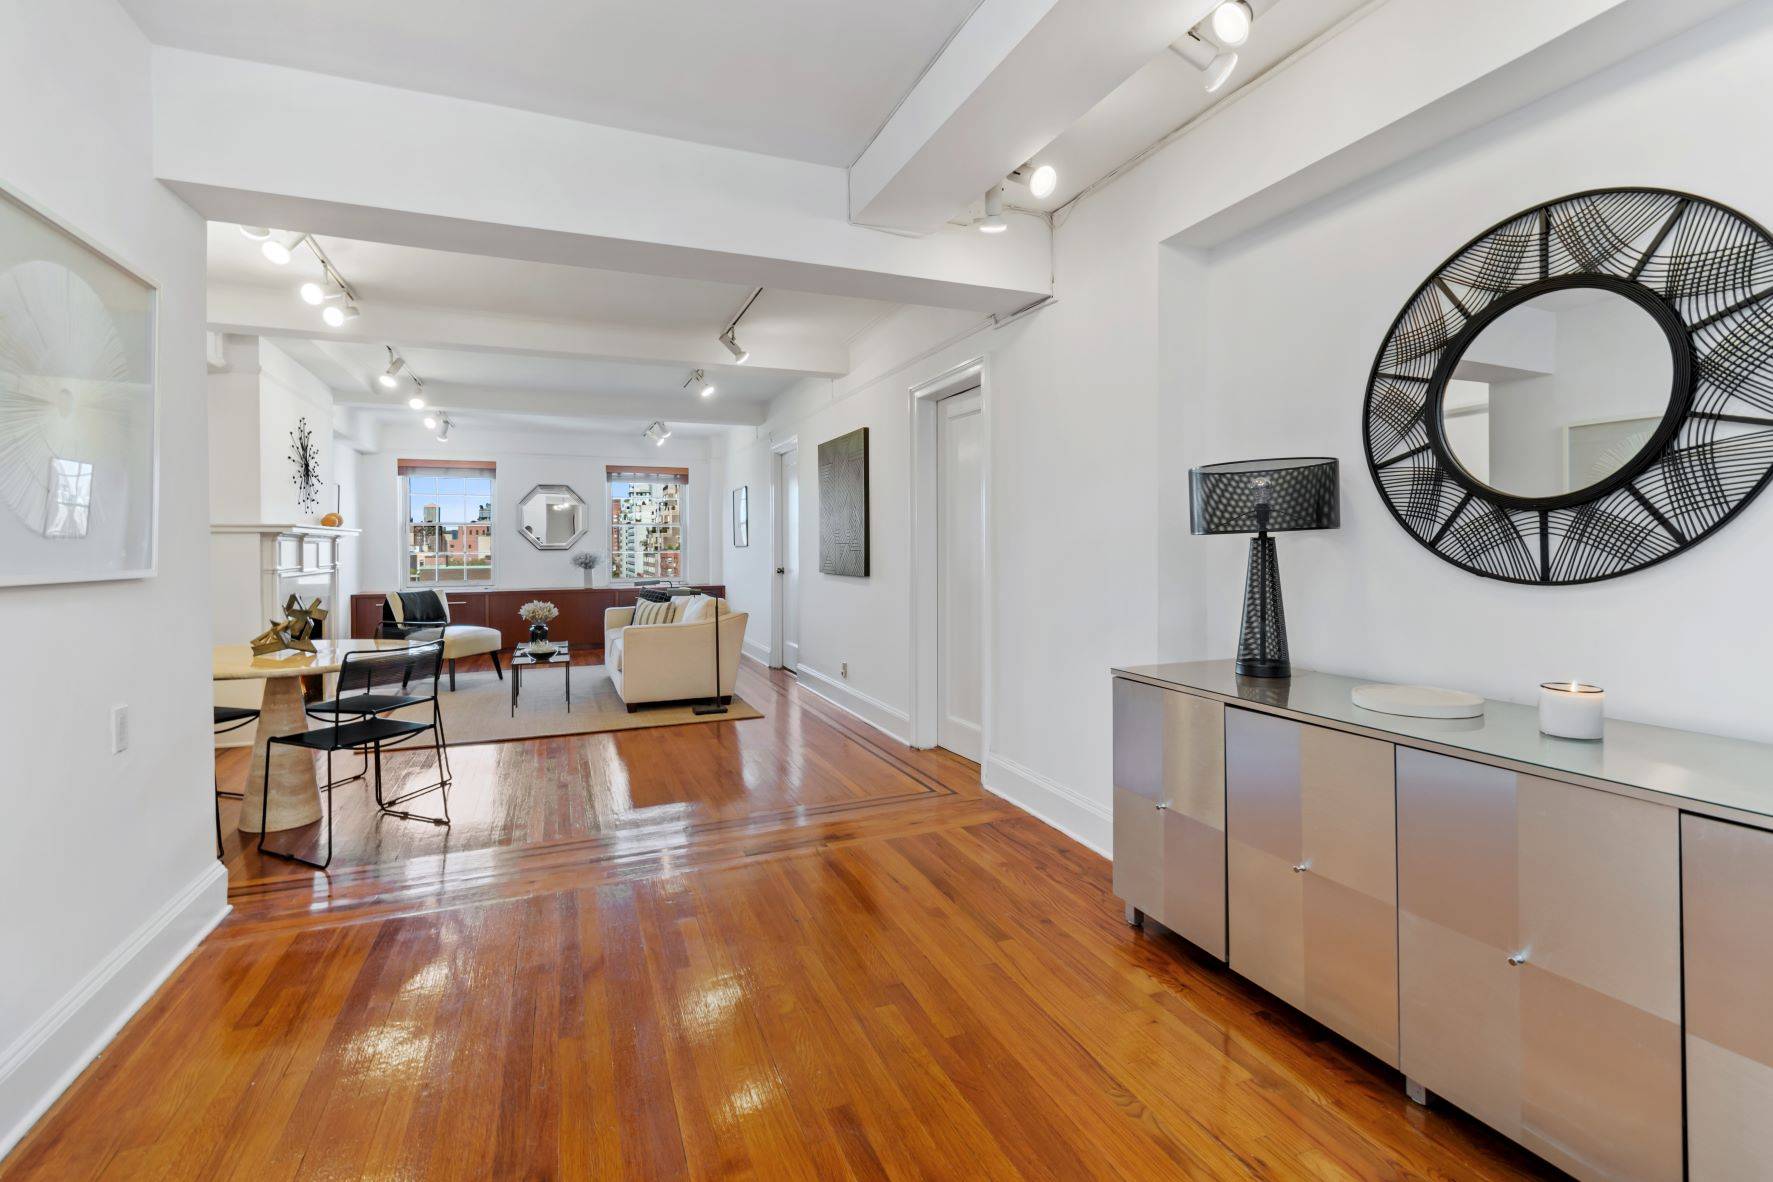 Rare opportunity to own this three bedroom renovated corner apartment, located in a pre war lower Fifth Avenue cooperative.